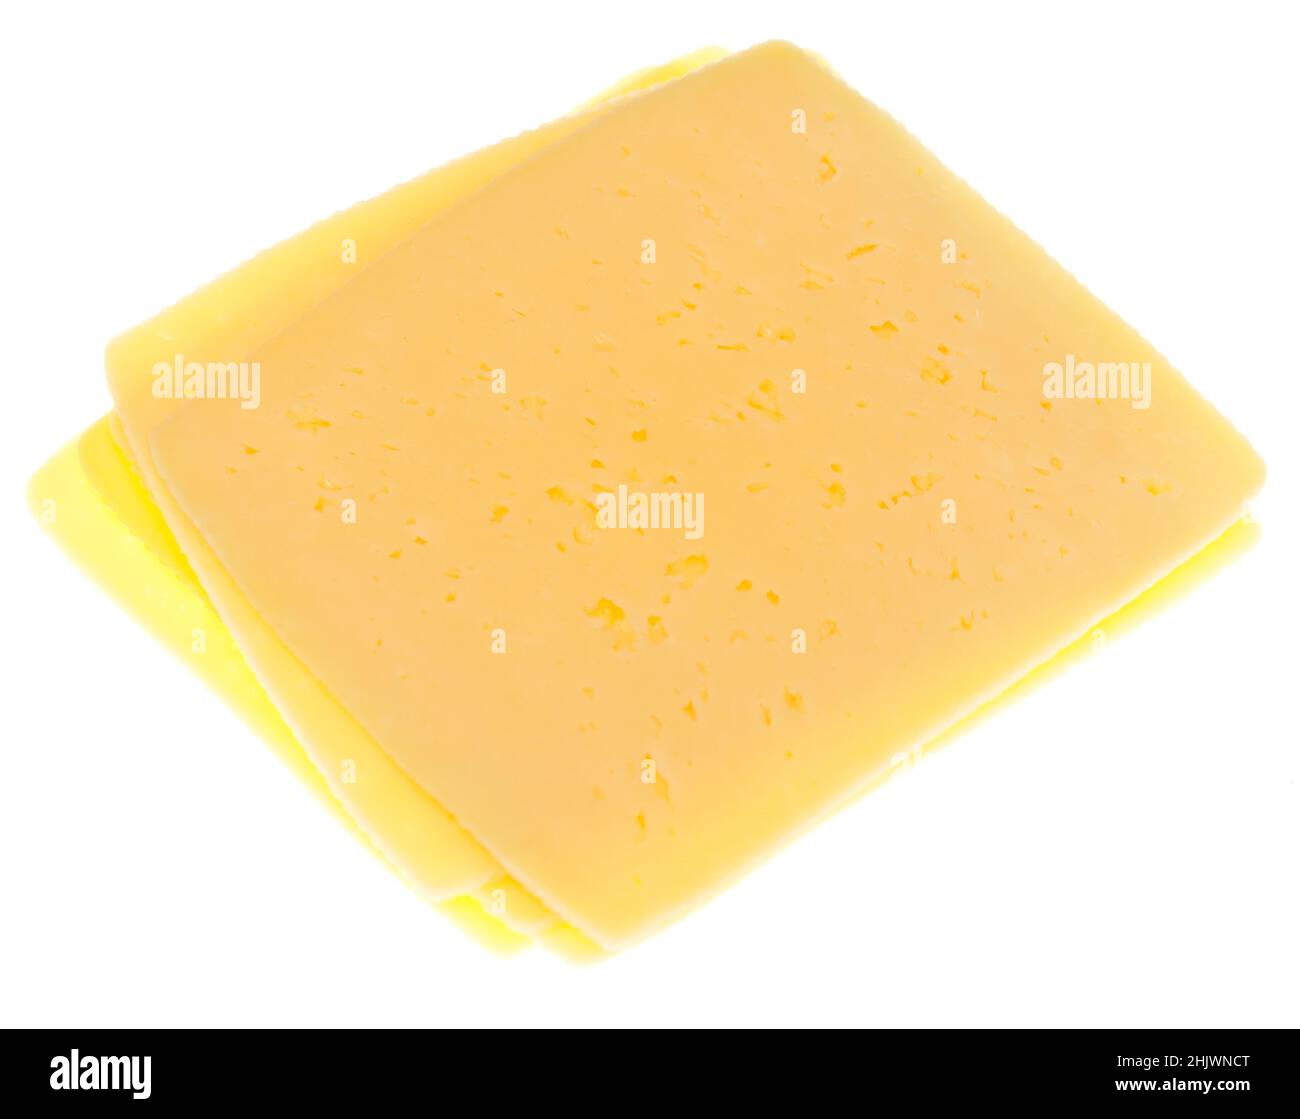 Pile of cheese slices on white background Stock Photo